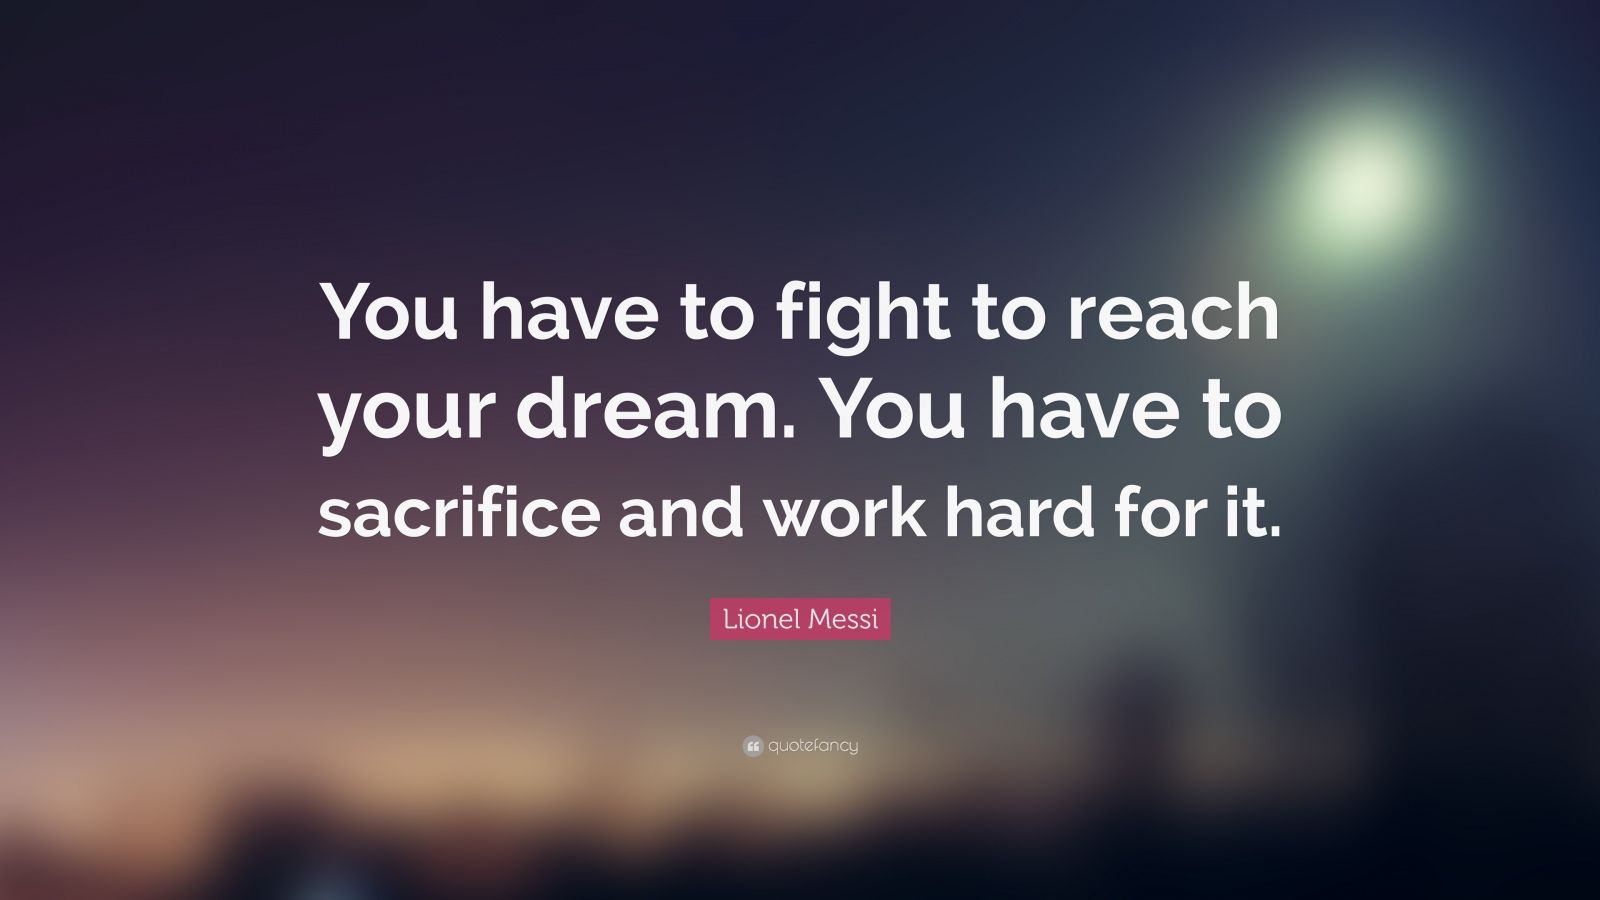 316456 Lionel Messi Quote You have to fight to reach your dream You have